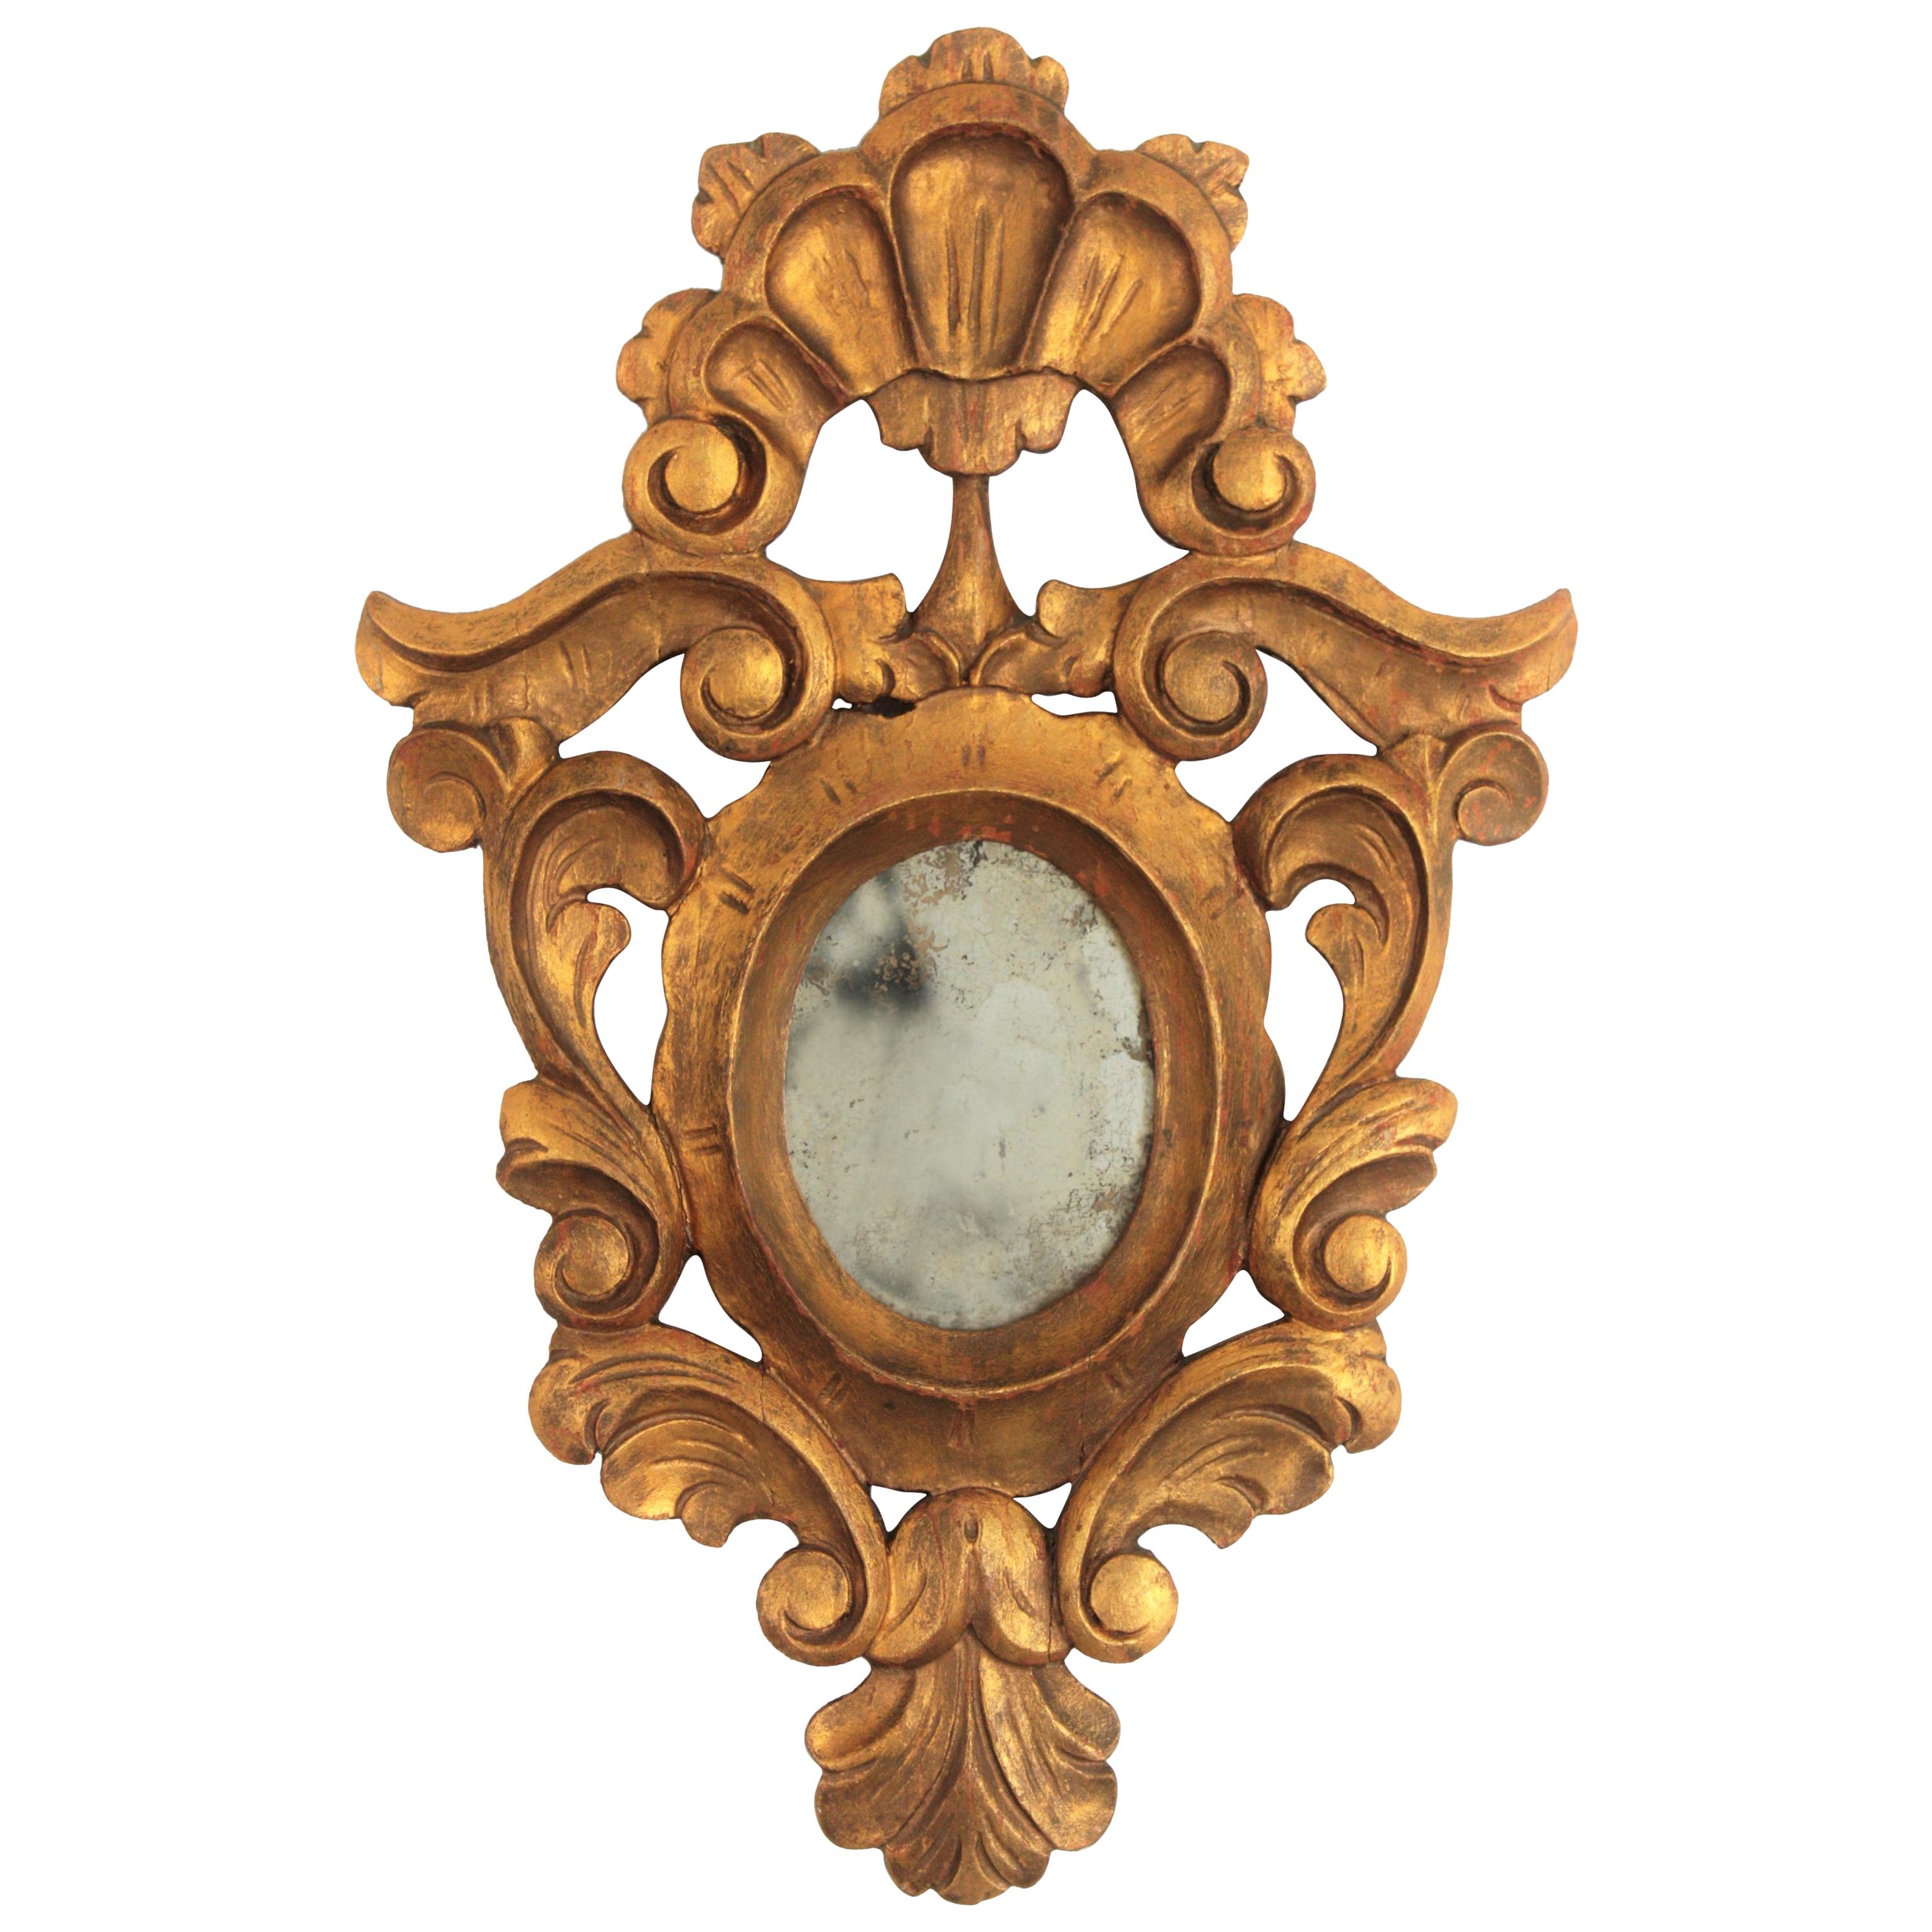 Rococo mirror, carved giltwood, Spain, 1920s.
Lovely Rococo style small mirror with a carved giltwood frame surrounding an oval shaped glass. Itf has a beautiful crest adorning the top and naturalistic decorations at the frame. This piece it is